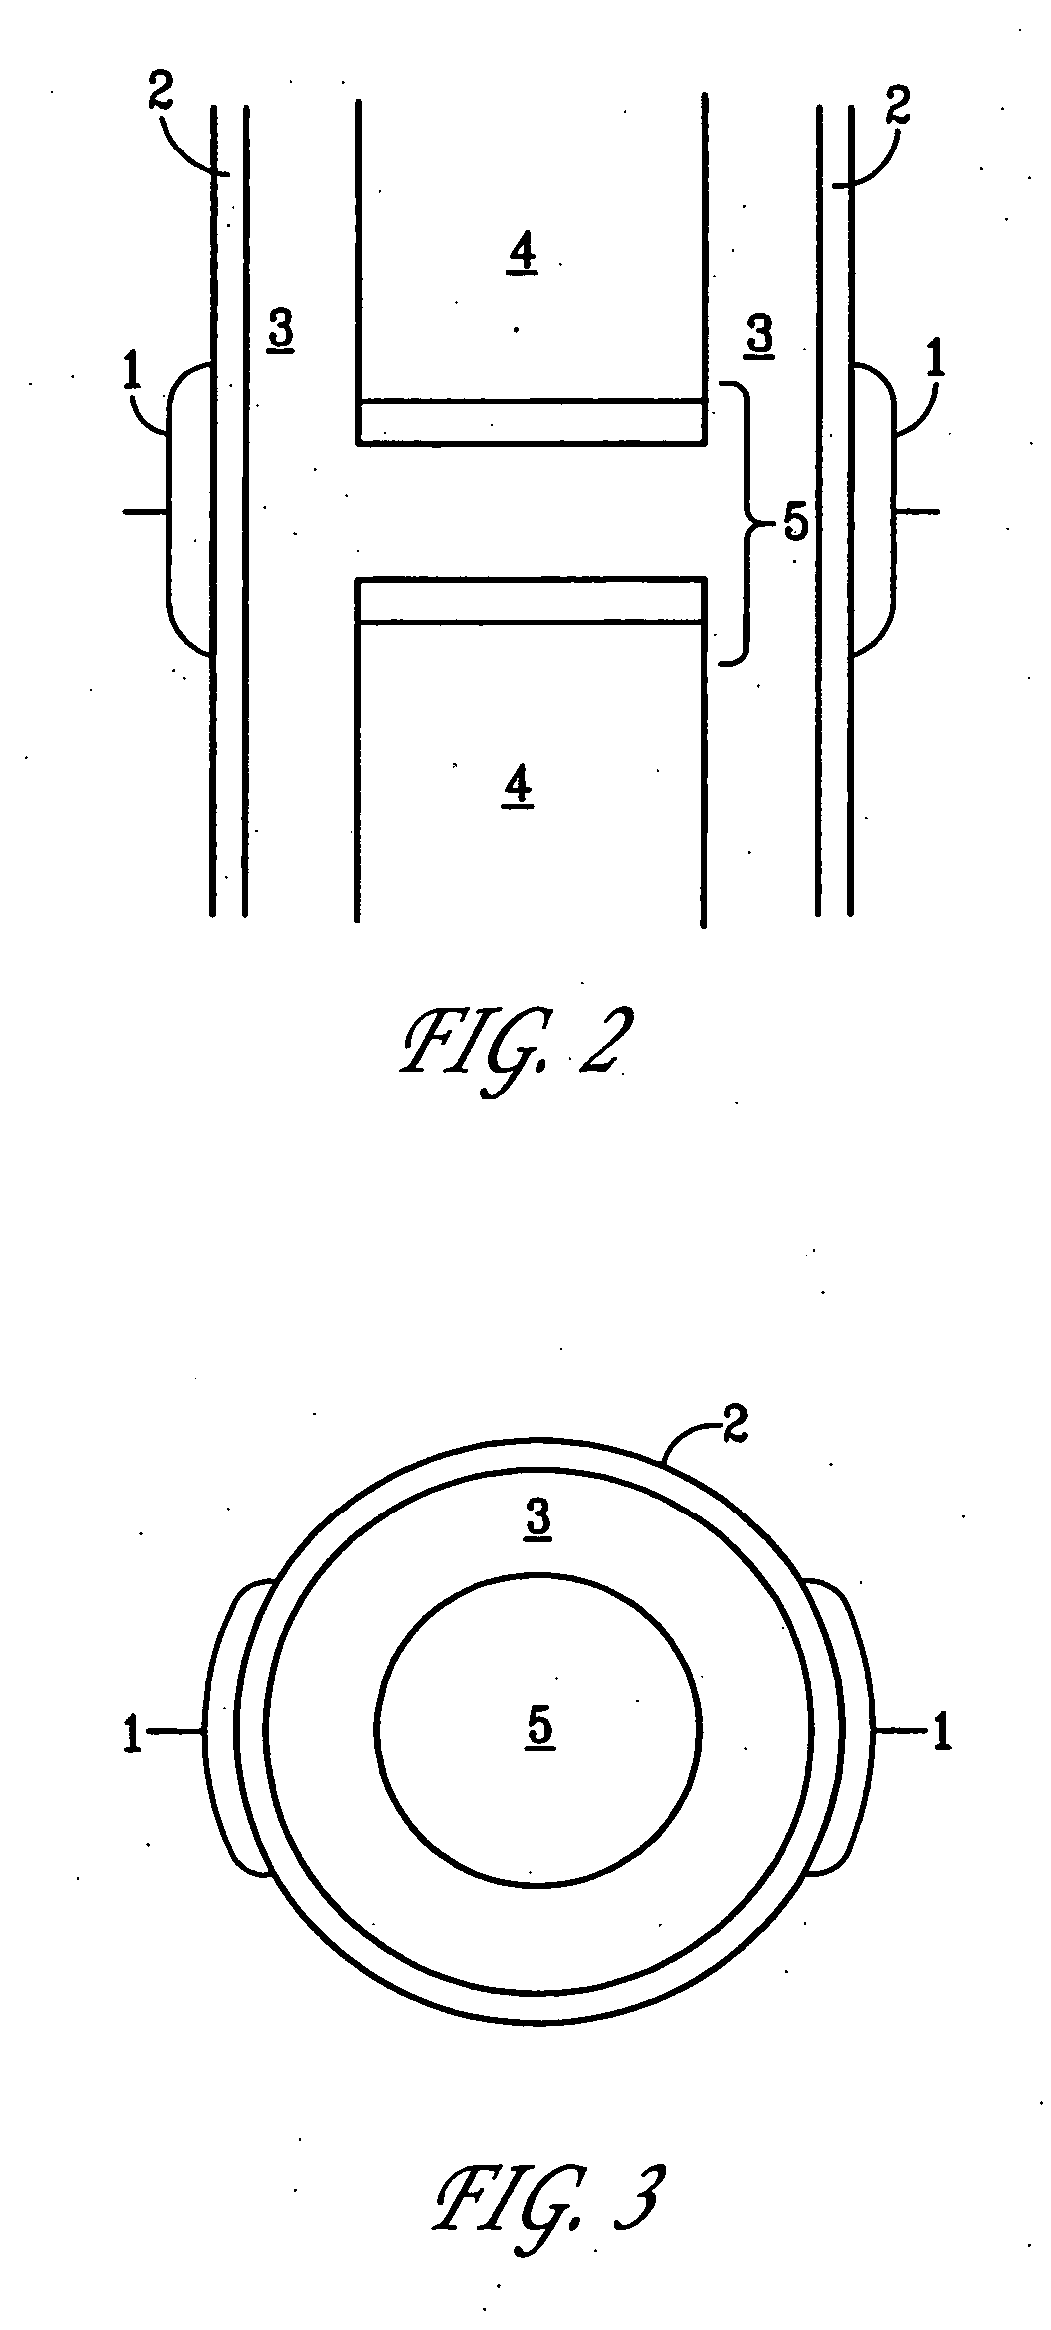 Method and device for treating osteoarthritis, cartilage disease, defects and injuries in the human knee